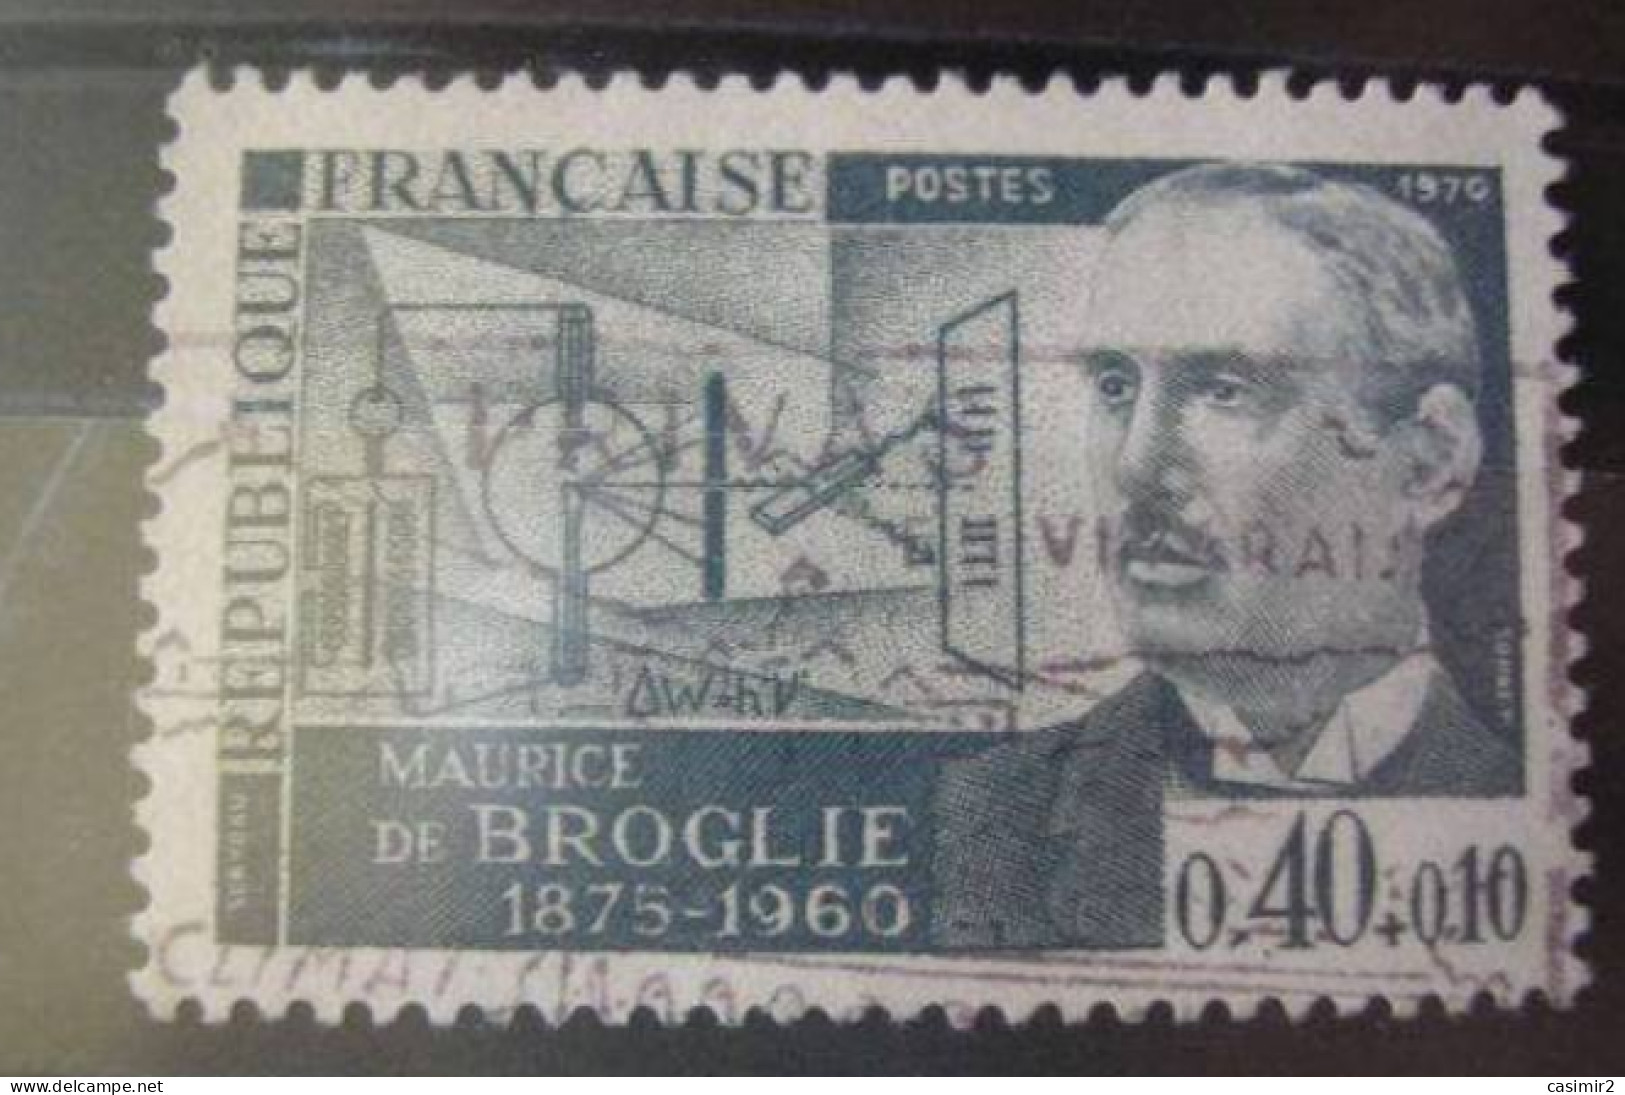 TIMBRE OBLITERE YVERT N° 1627 - Used Stamps